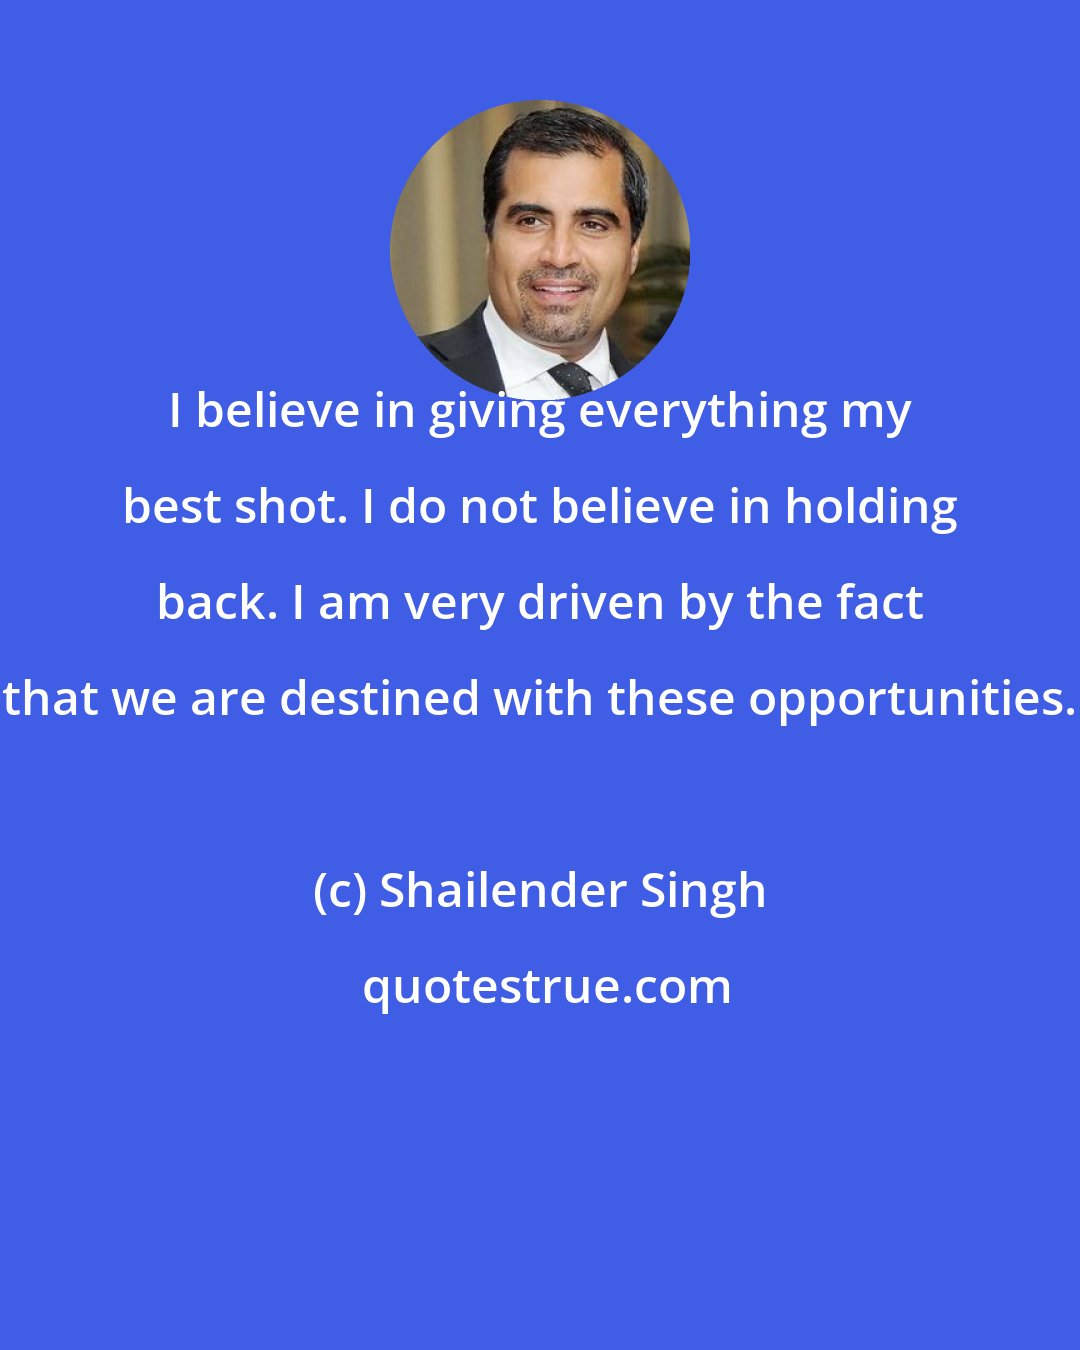 Shailender Singh: I believe in giving everything my best shot. I do not believe in holding back. I am very driven by the fact that we are destined with these opportunities.